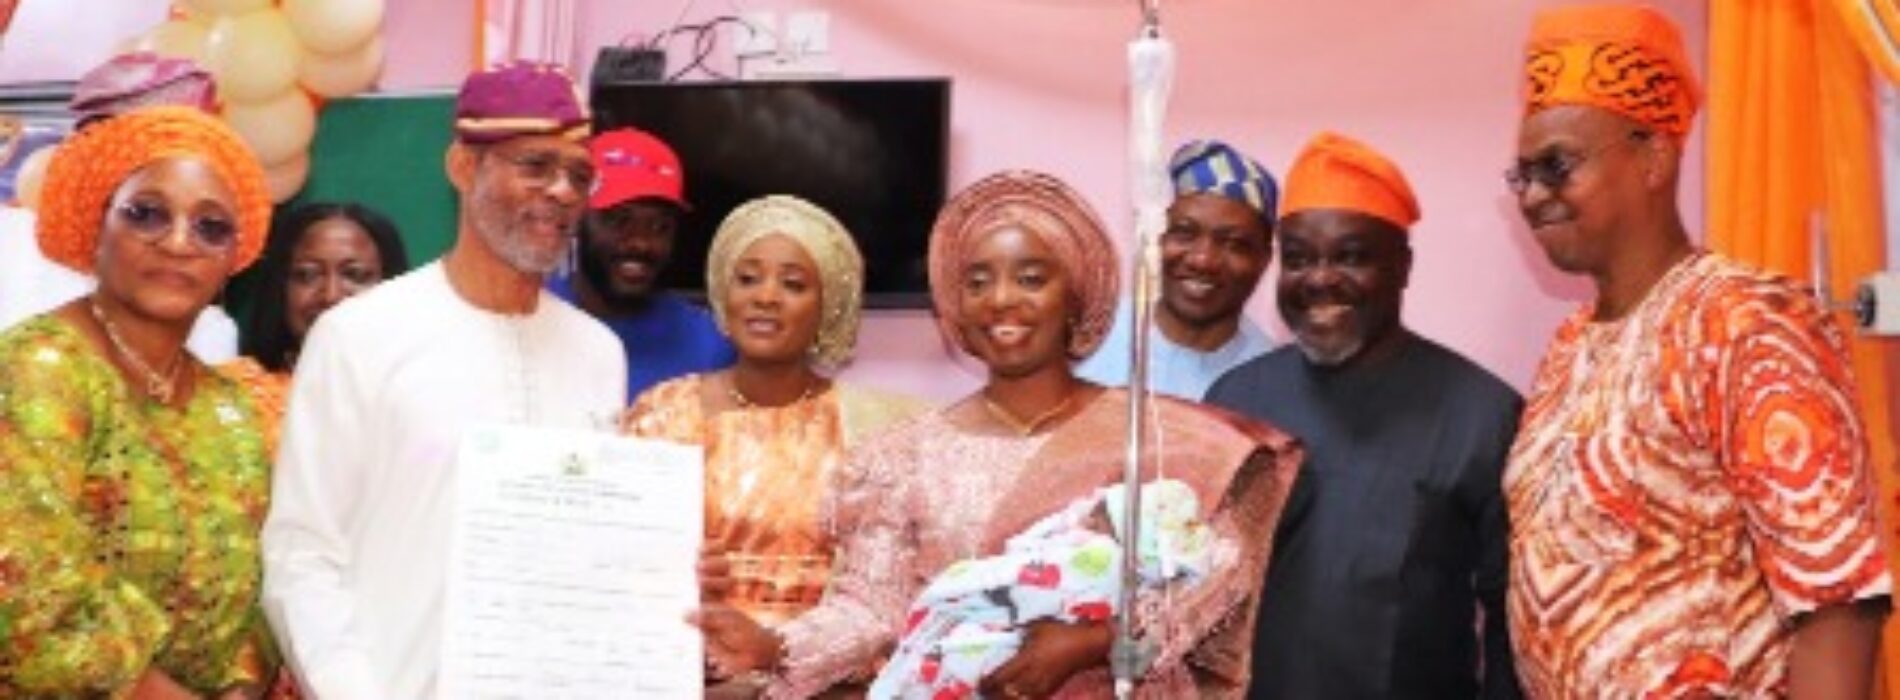 Lagos welcomes ‘Baby of The Year’